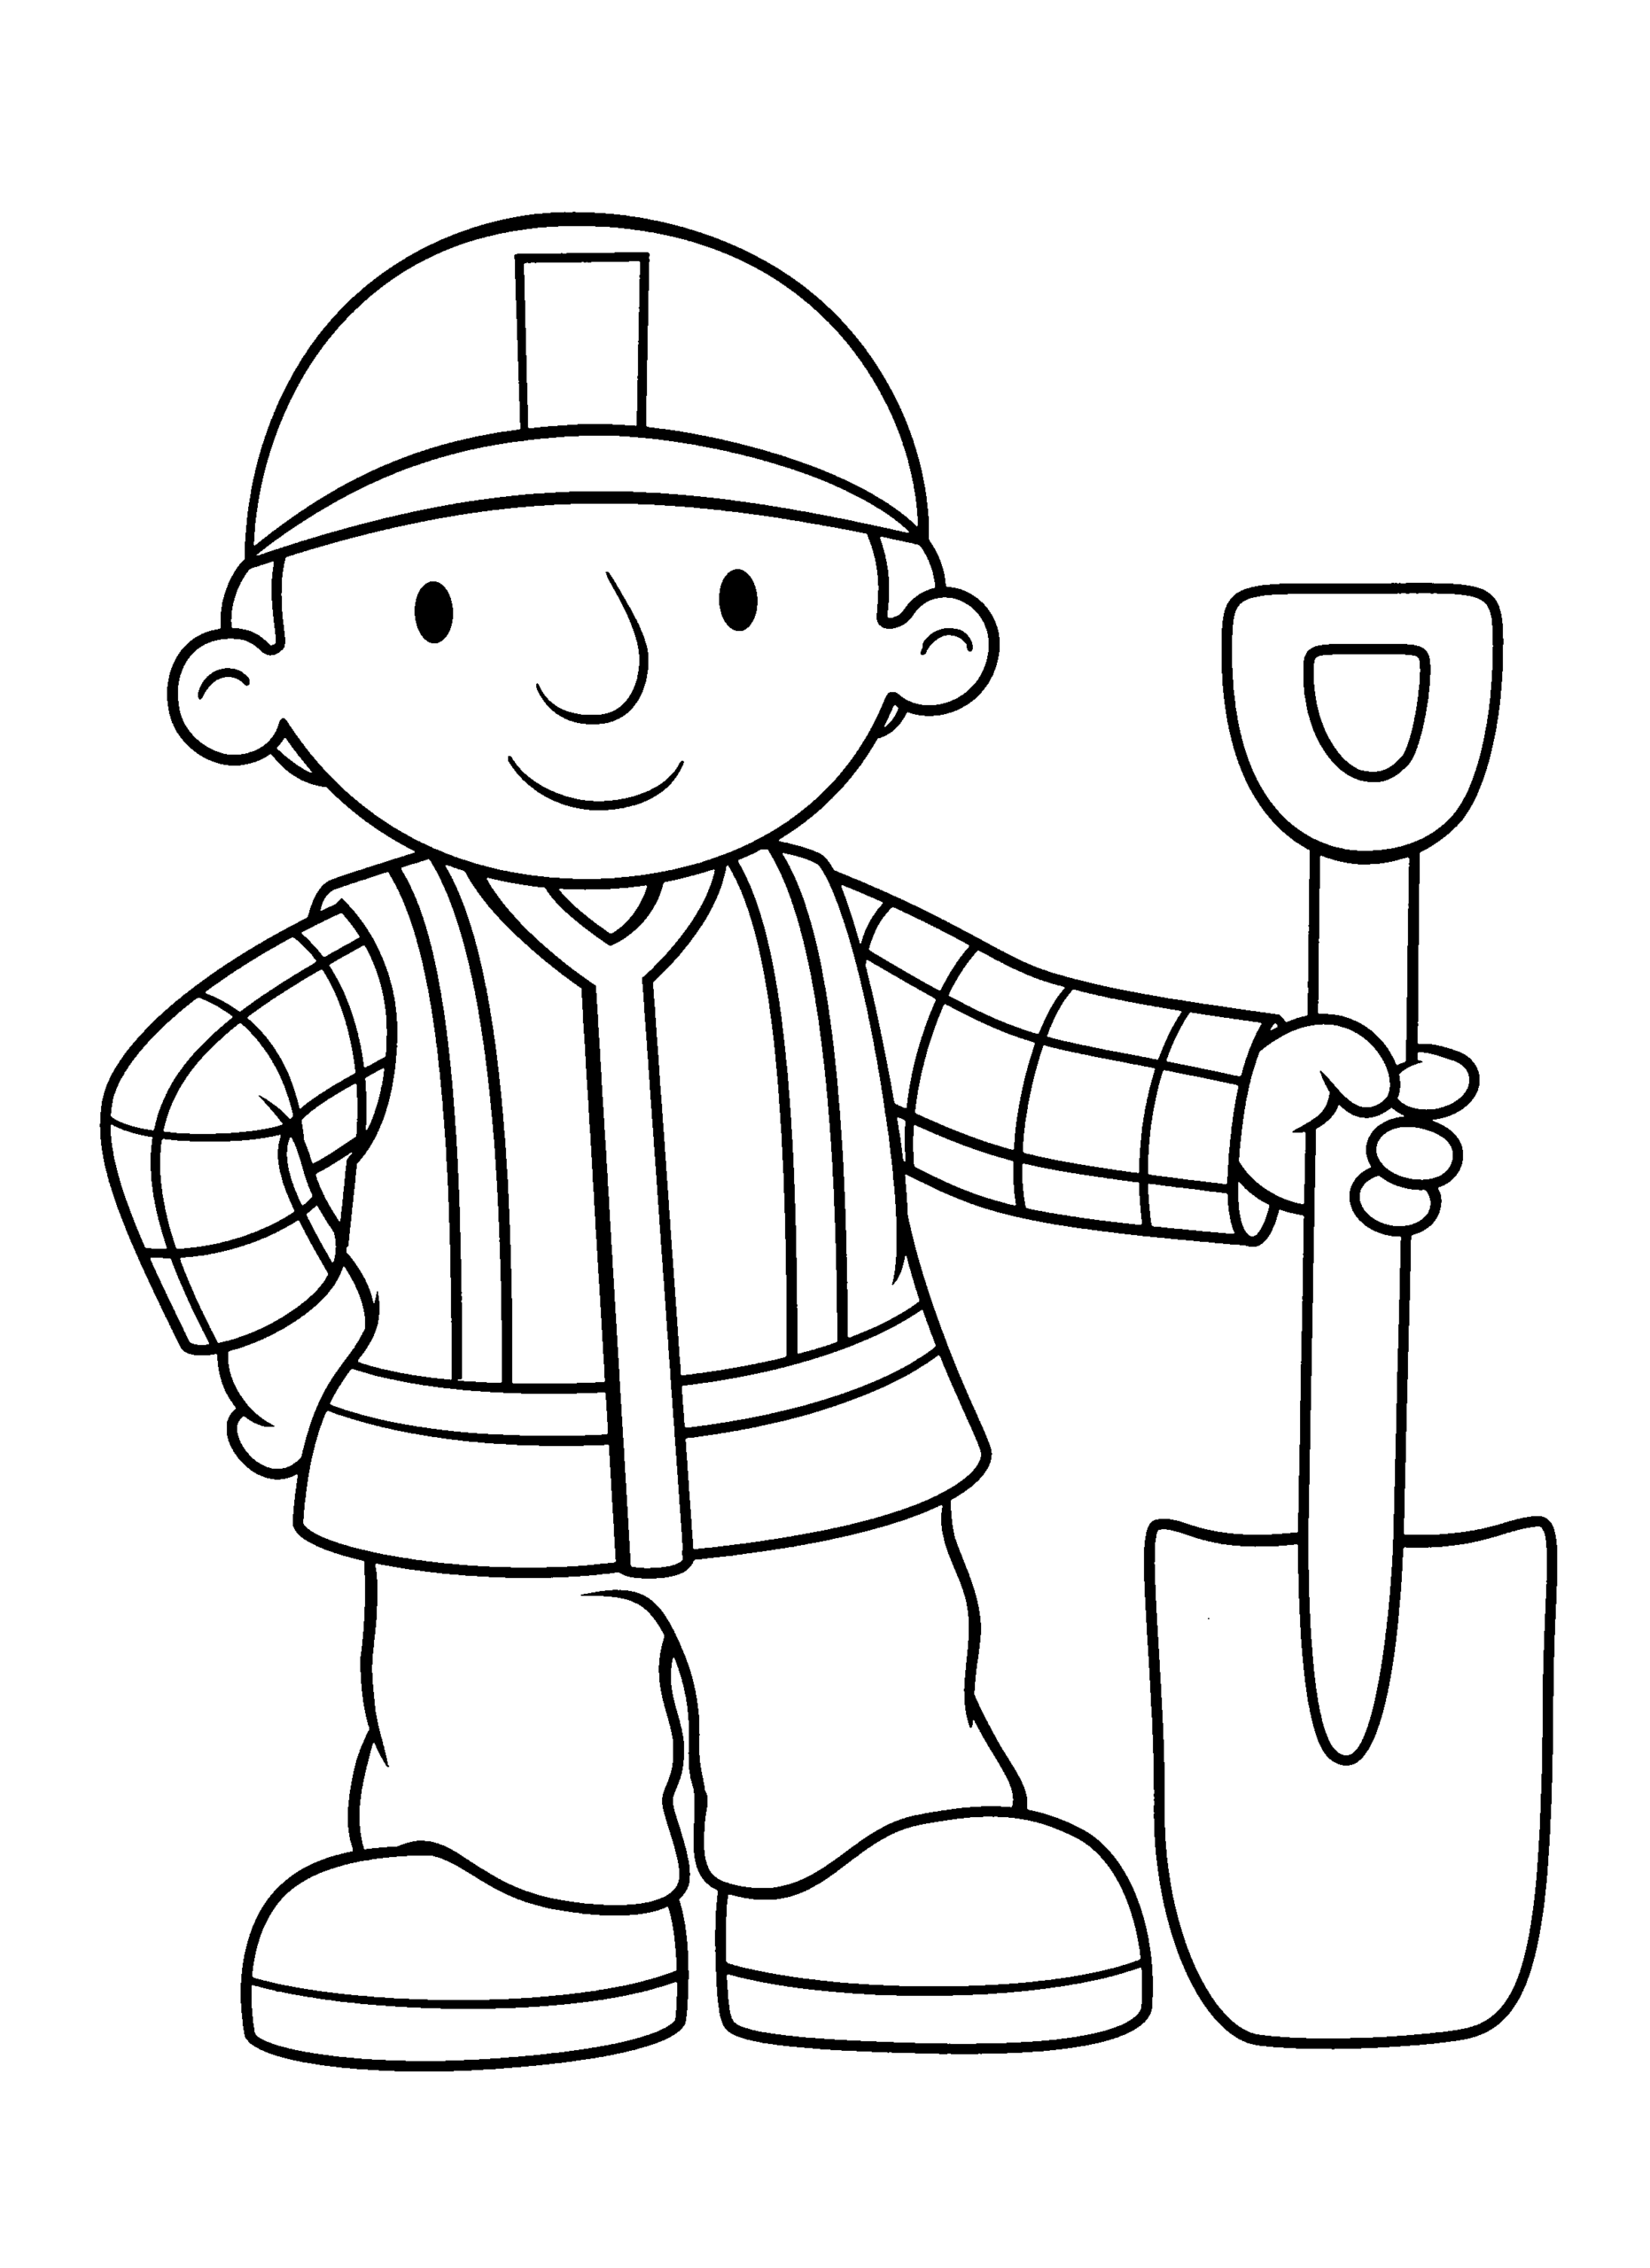 Bob the Builder Coloring Pages TV Film bob the builder 2 Printable 2020 01034 Coloring4free